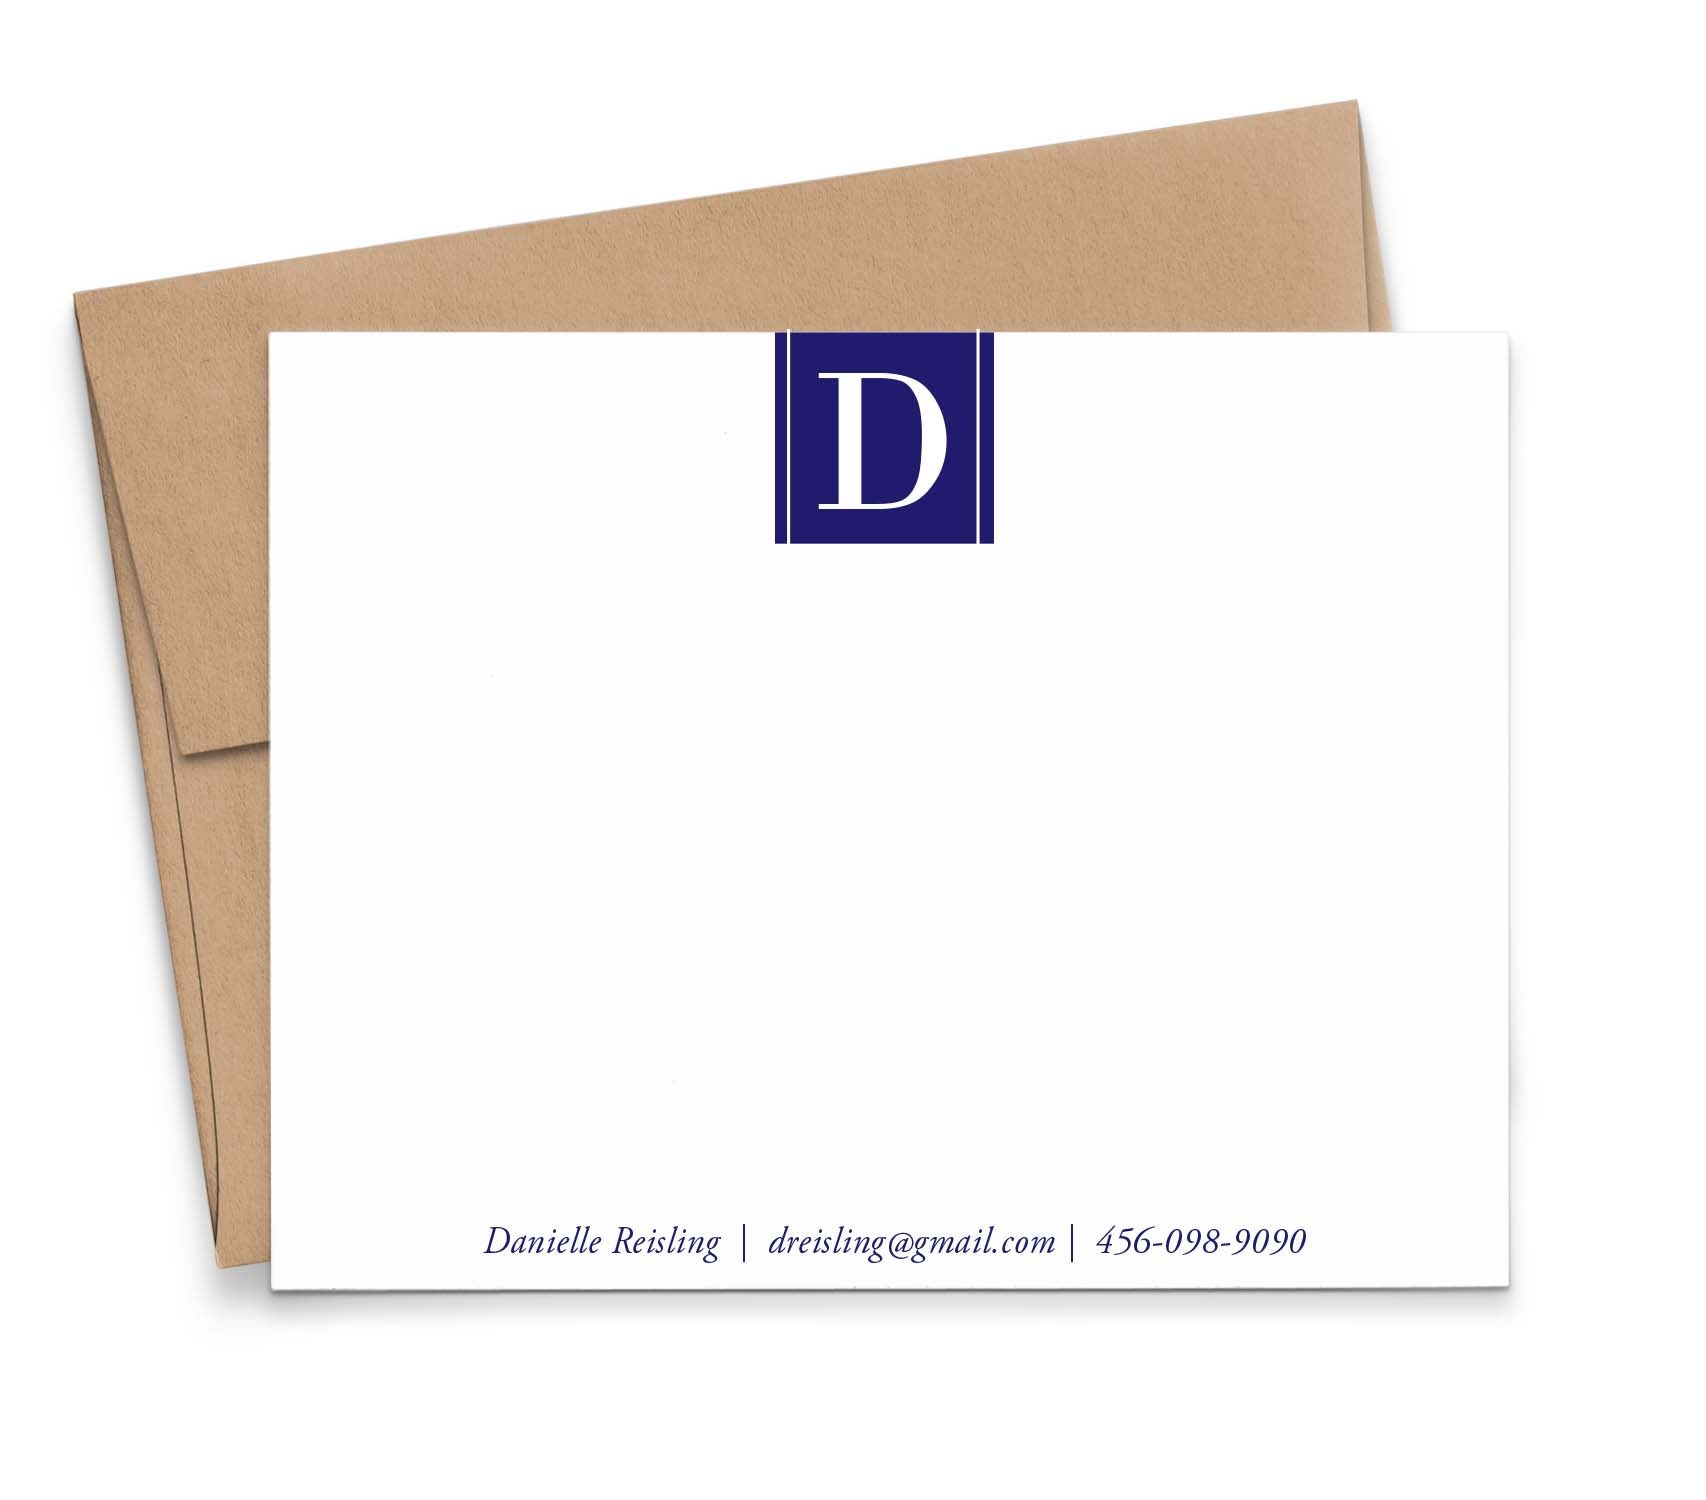 Customized Cards And Envelopes